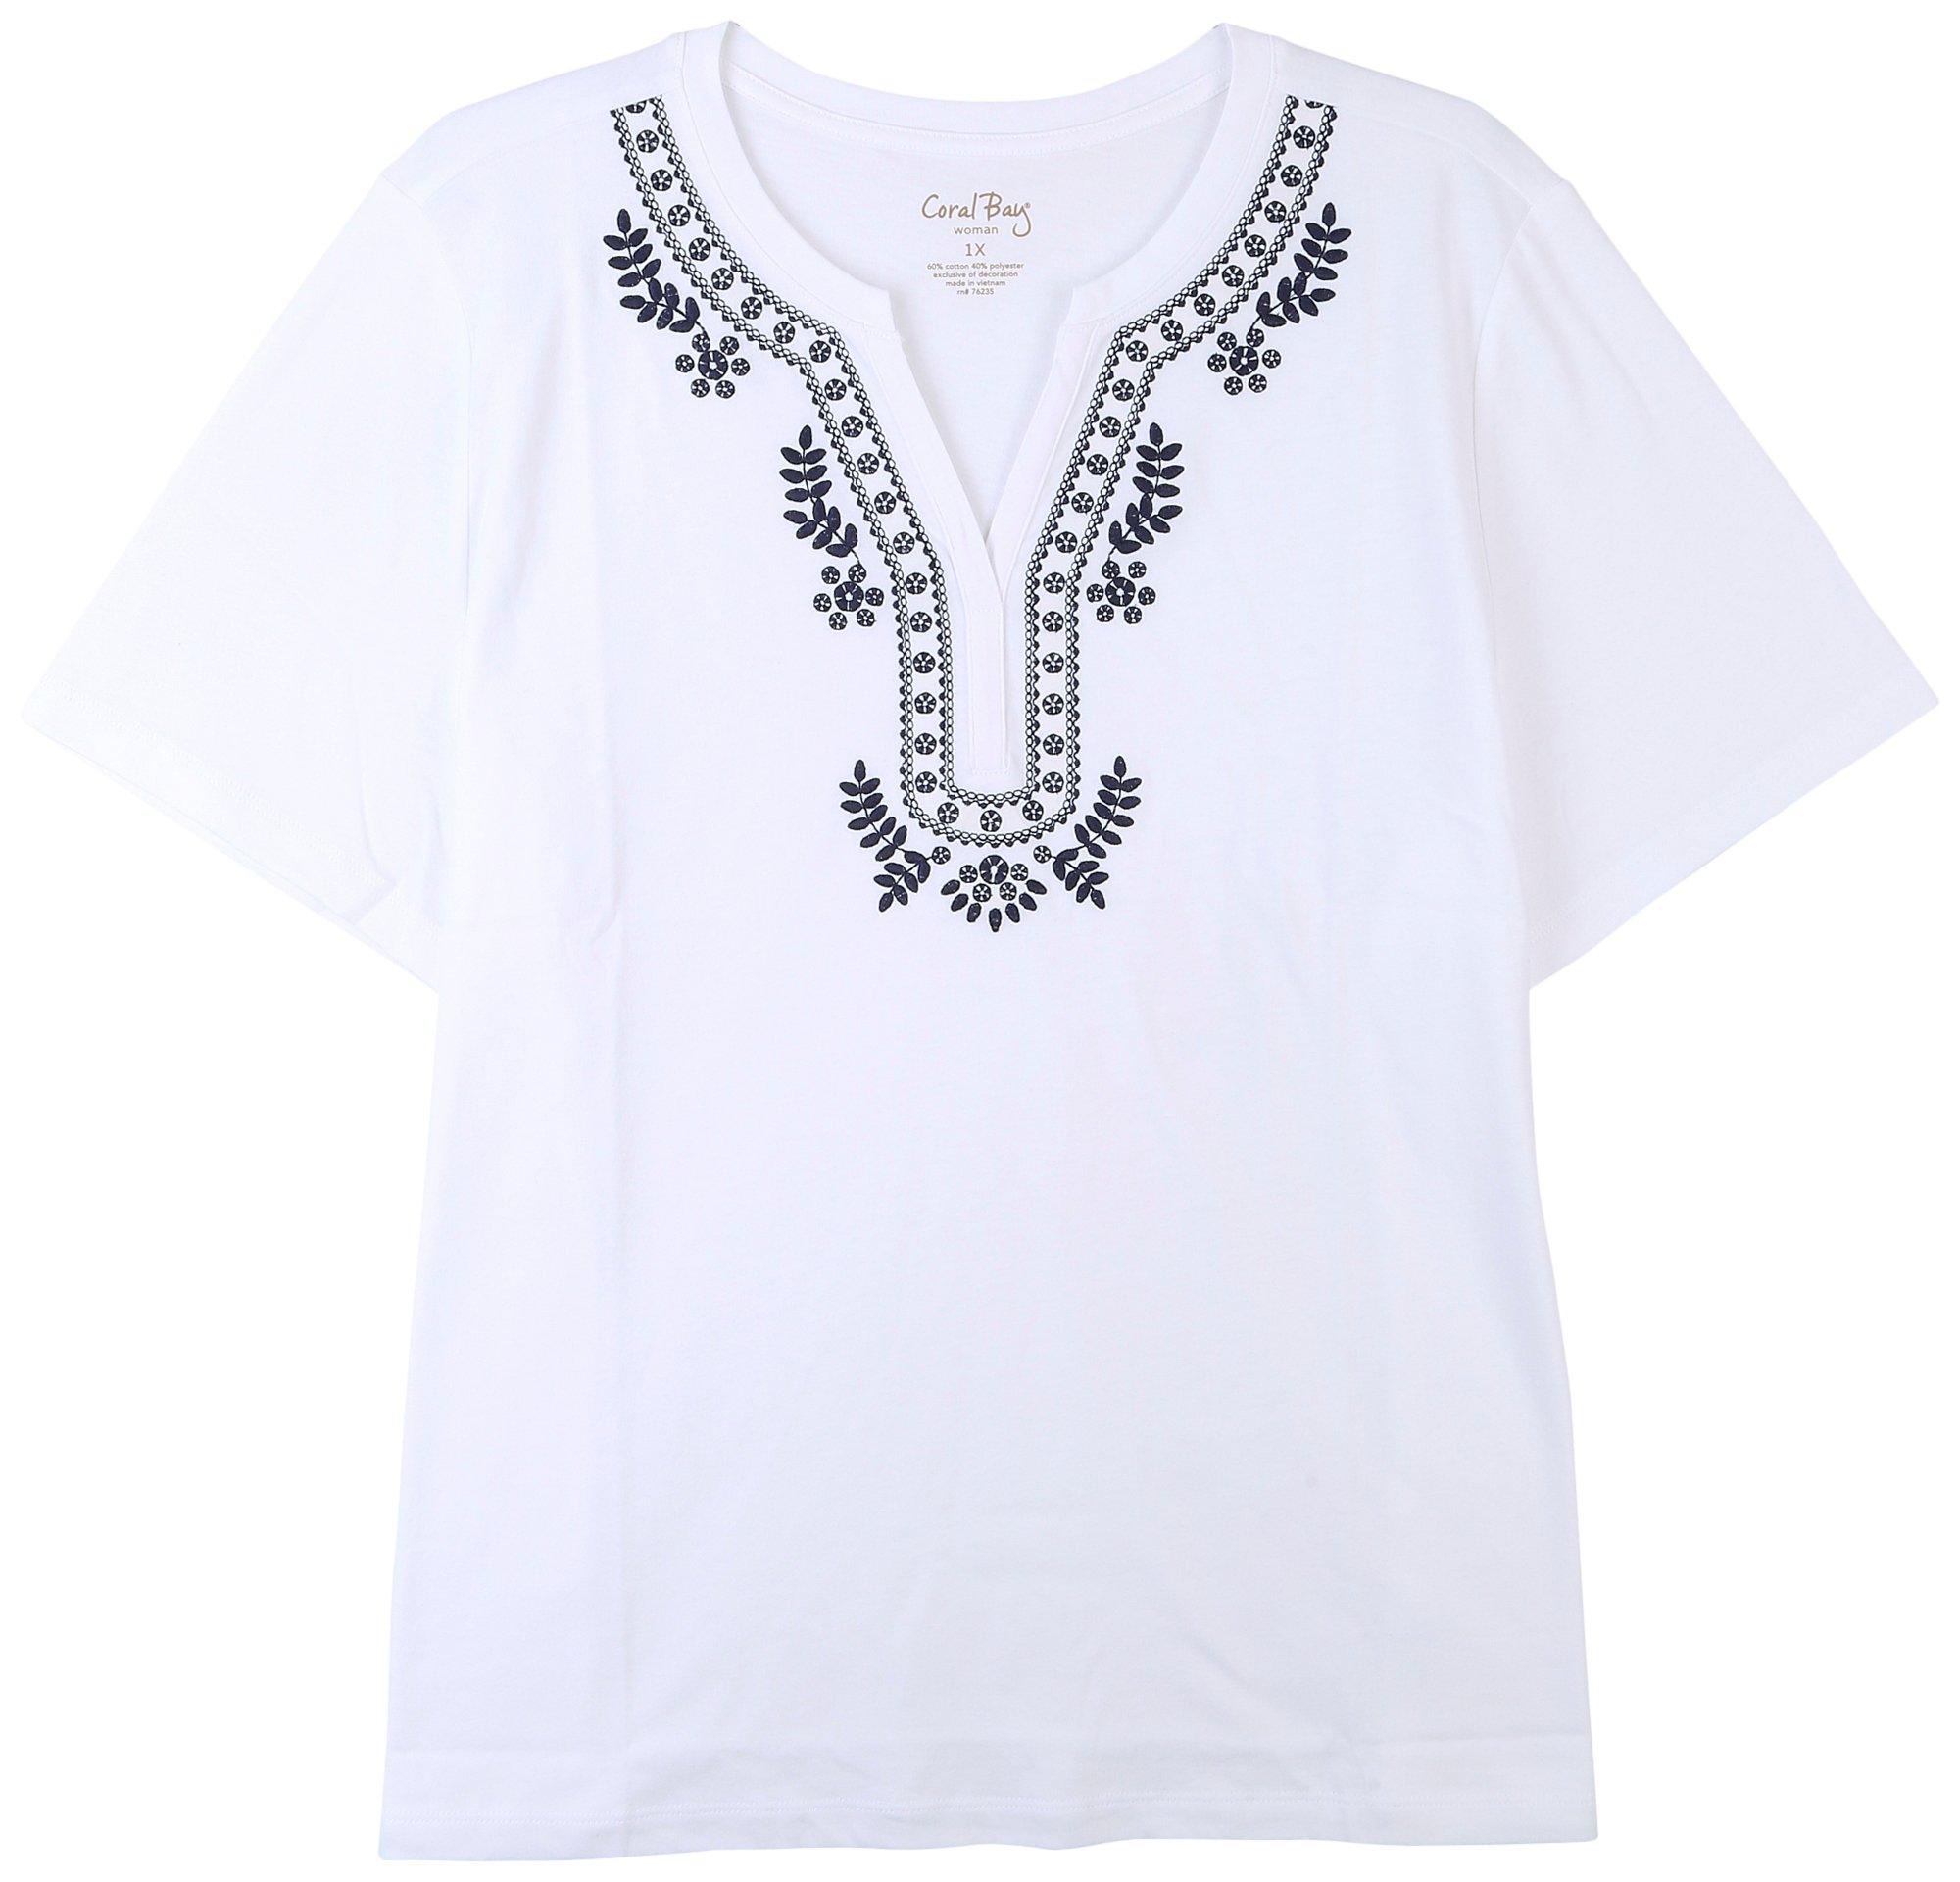 Plus Embroidered Henley V-Neck Short Sleeve Tee